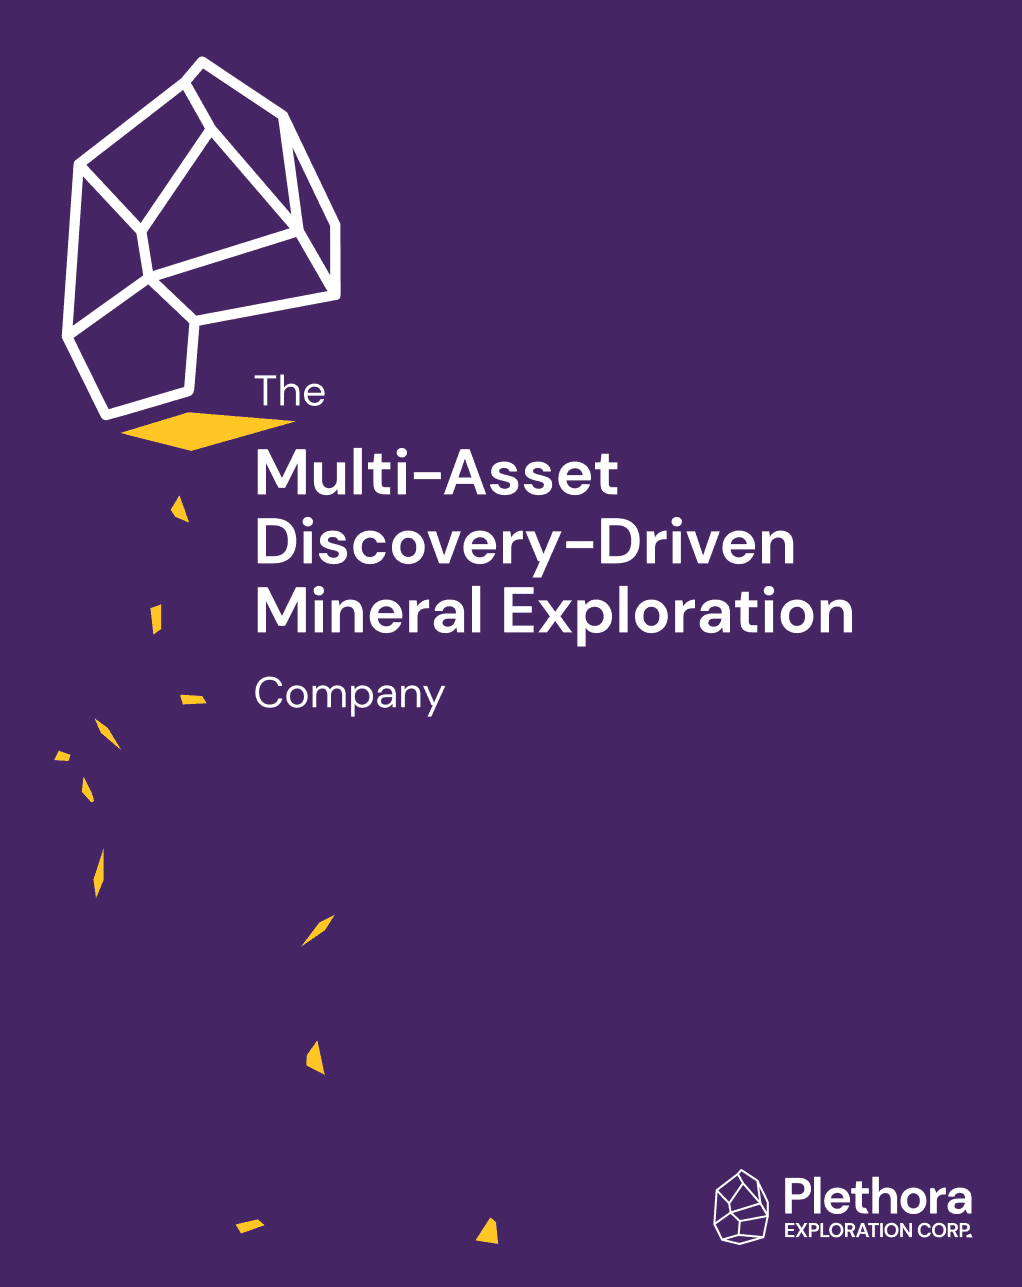 Logo of Plethora Exploration Corp with a geometric crystal icon in white and yellow on a purple background. Text reads 'The Multi-Asset Discovery-Driven Mineral Exploration Company' beneath the crystal